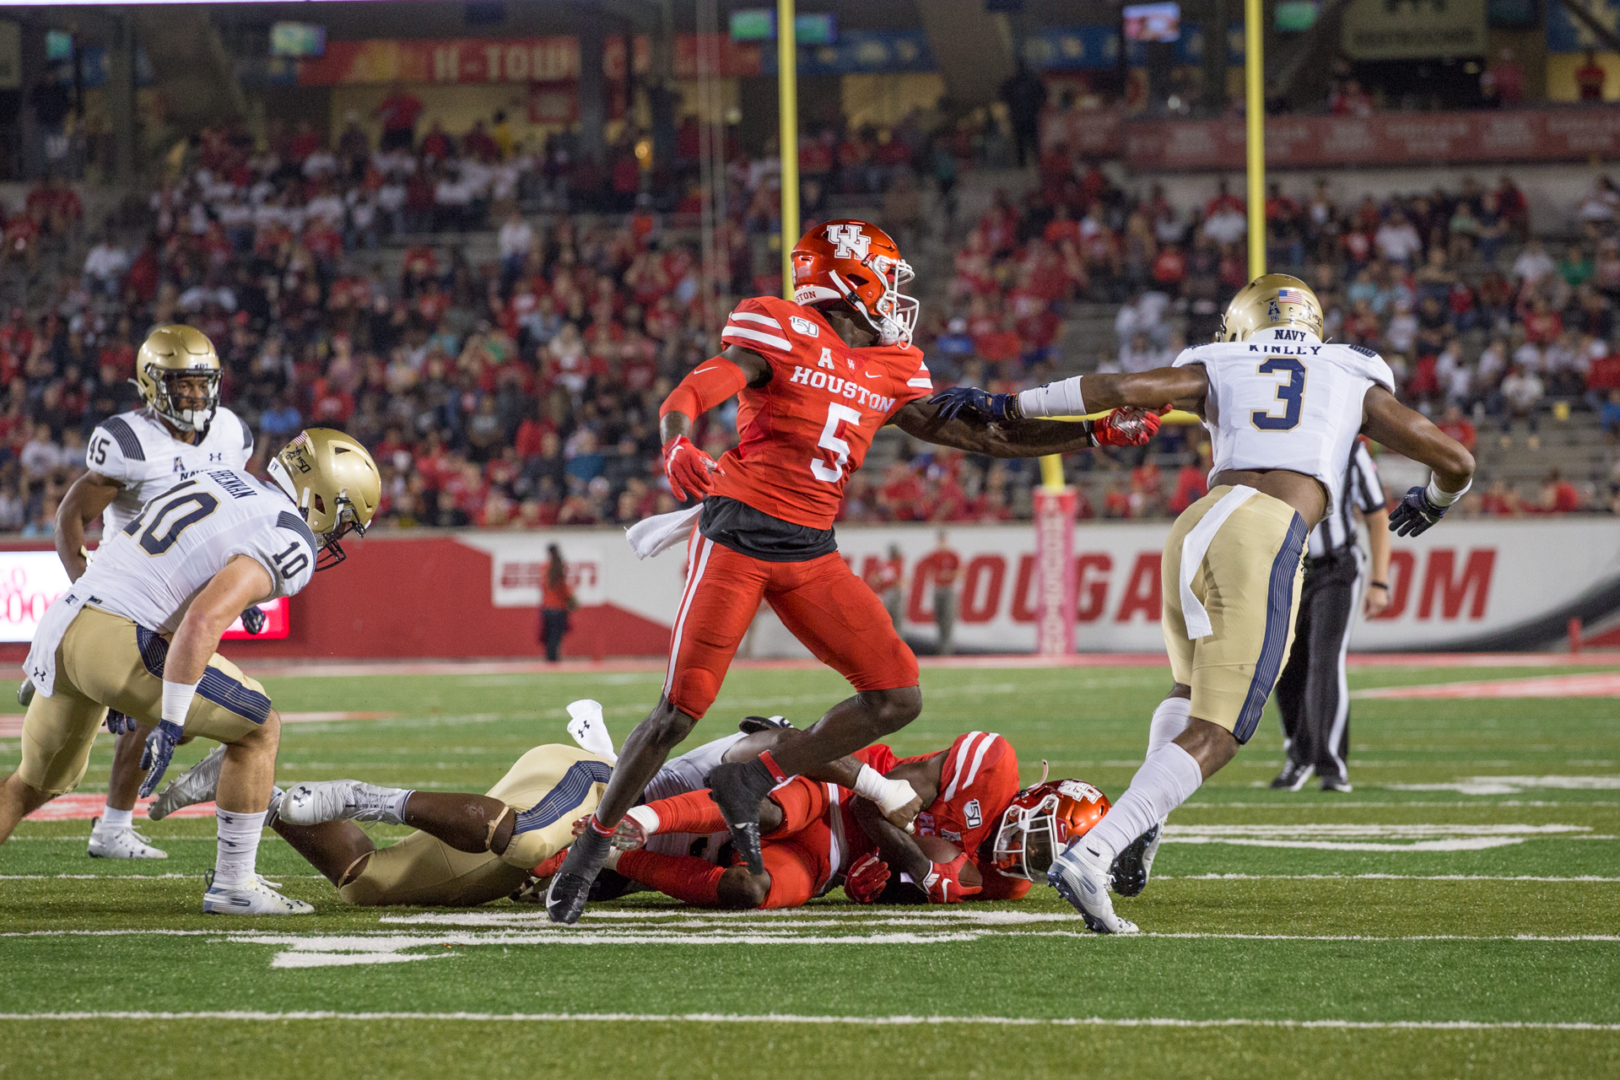 Junior wide receiver Marquez Stevenson finished the night with 133 yards on eight catches in Houston’s 56-41 loss to No. 24 Navy. | Trevor Nolley/The Cougar